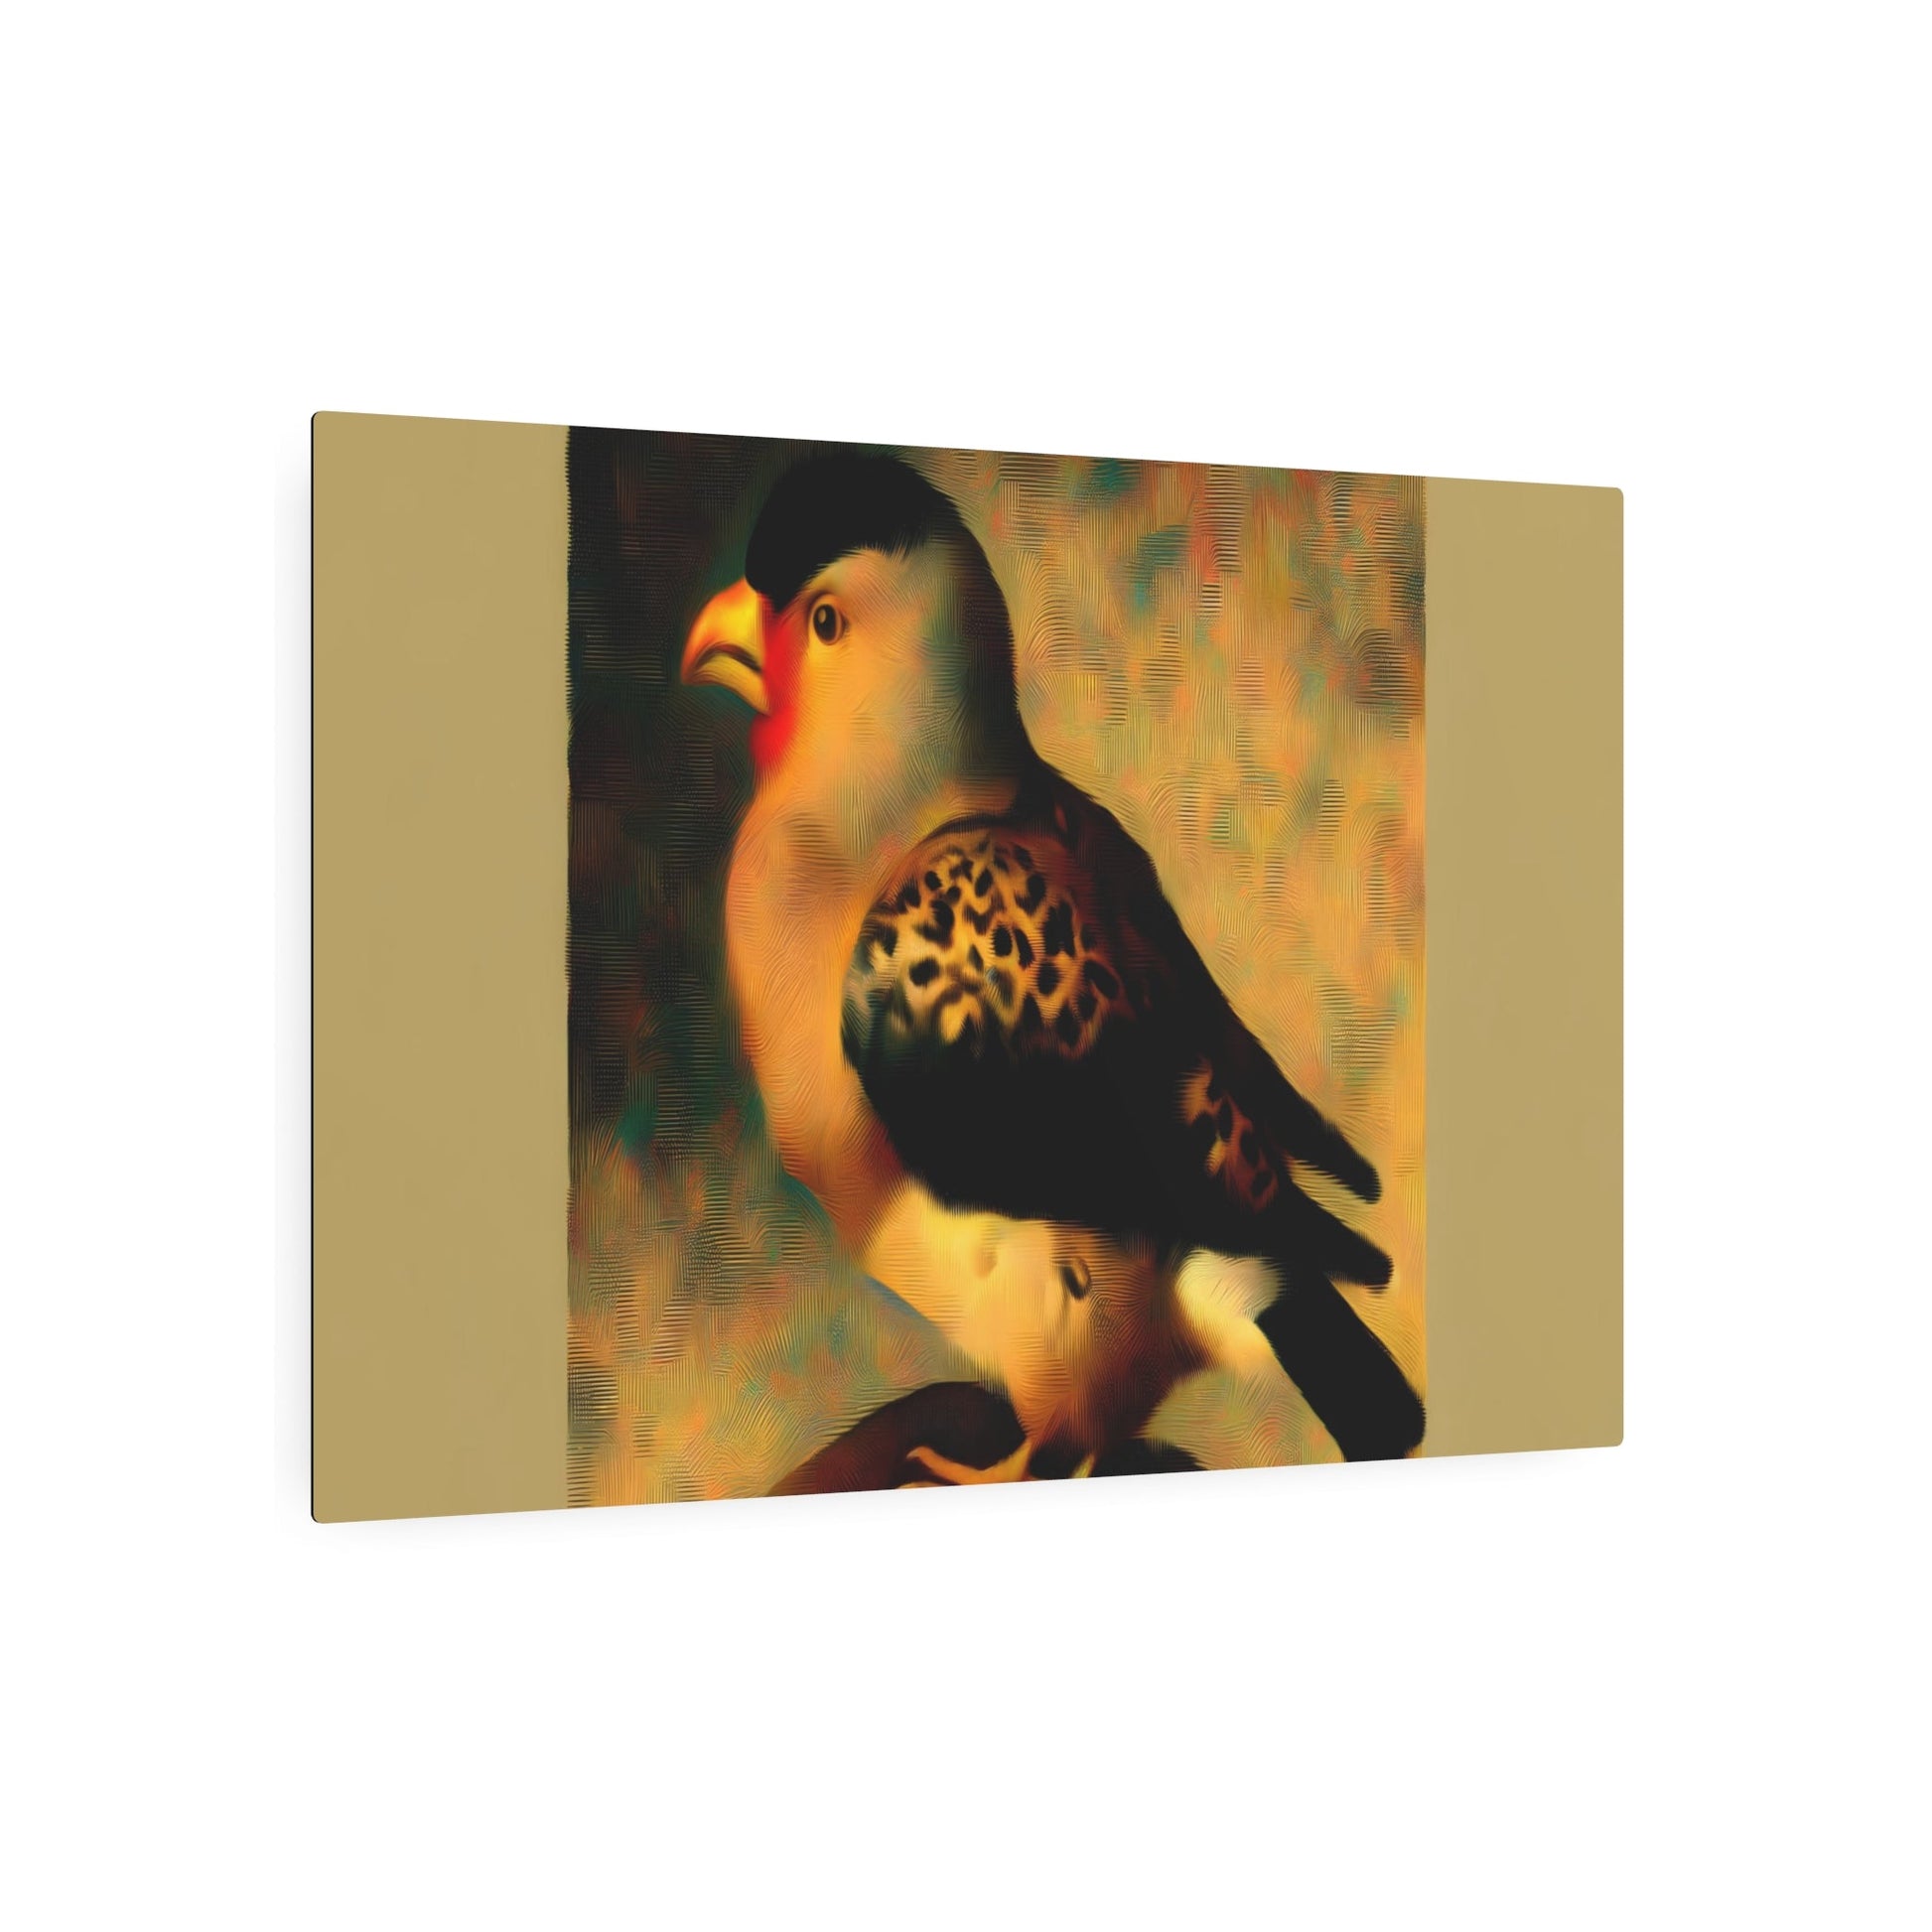 Metal Poster Art | "Neoclassicism Western Art Style Masterpiece - Bird Inspired Painting Influenced by Jacques-Louis David and Jean-Auguste-Dominique Ingres - Metal Poster Art 36″ x 24″ (Horizontal) 0.12''